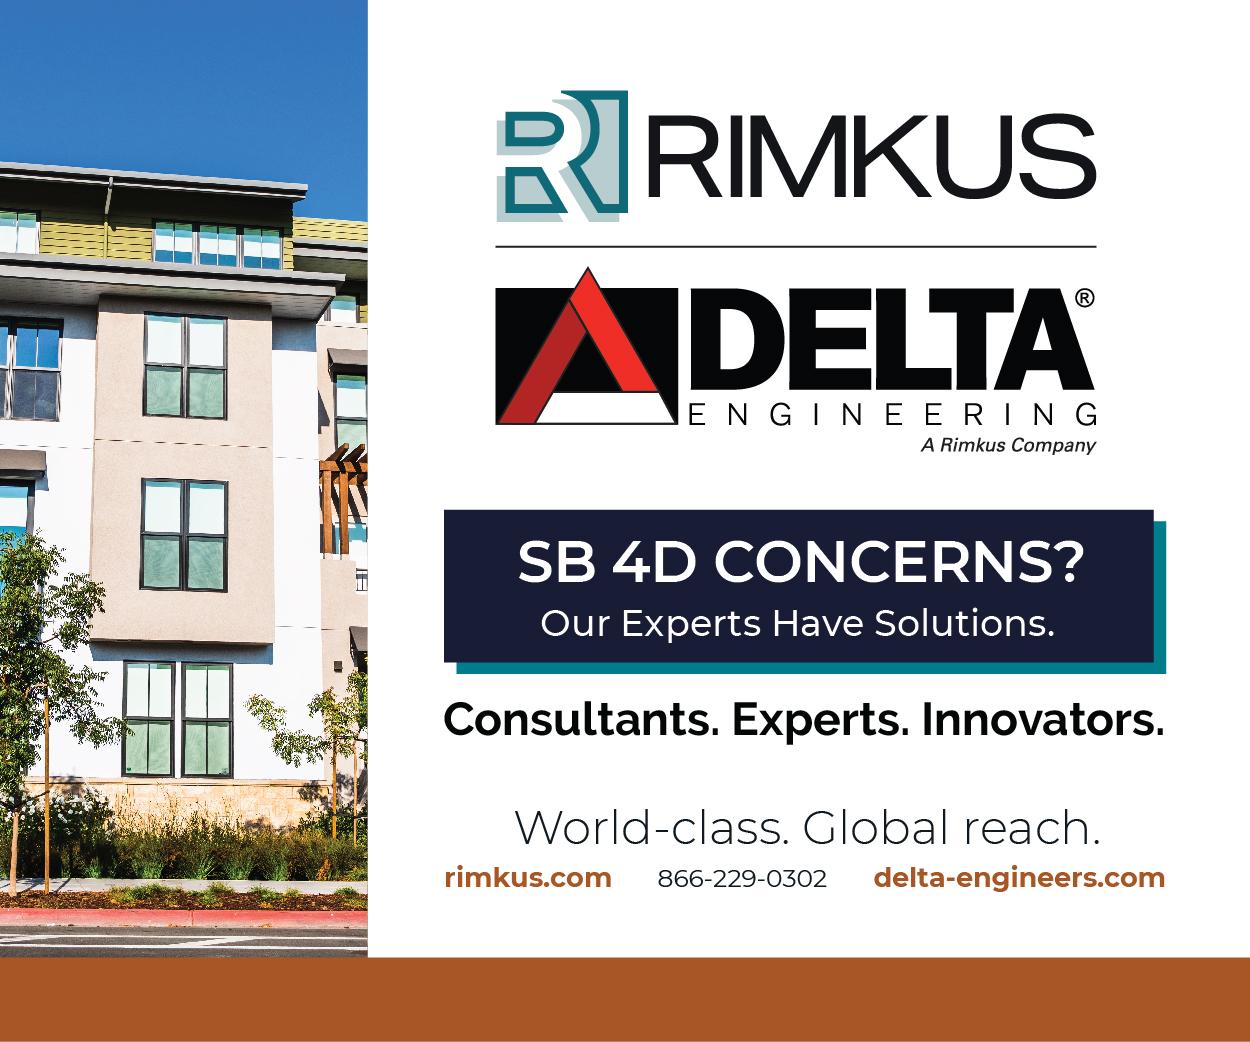 “RIMKUS” IS A WORLDWIDE LEADER IN ENGINEERING, CONSTRUCTION MANAGEMENT AND CONSULTING AND SO MUCH MORE.